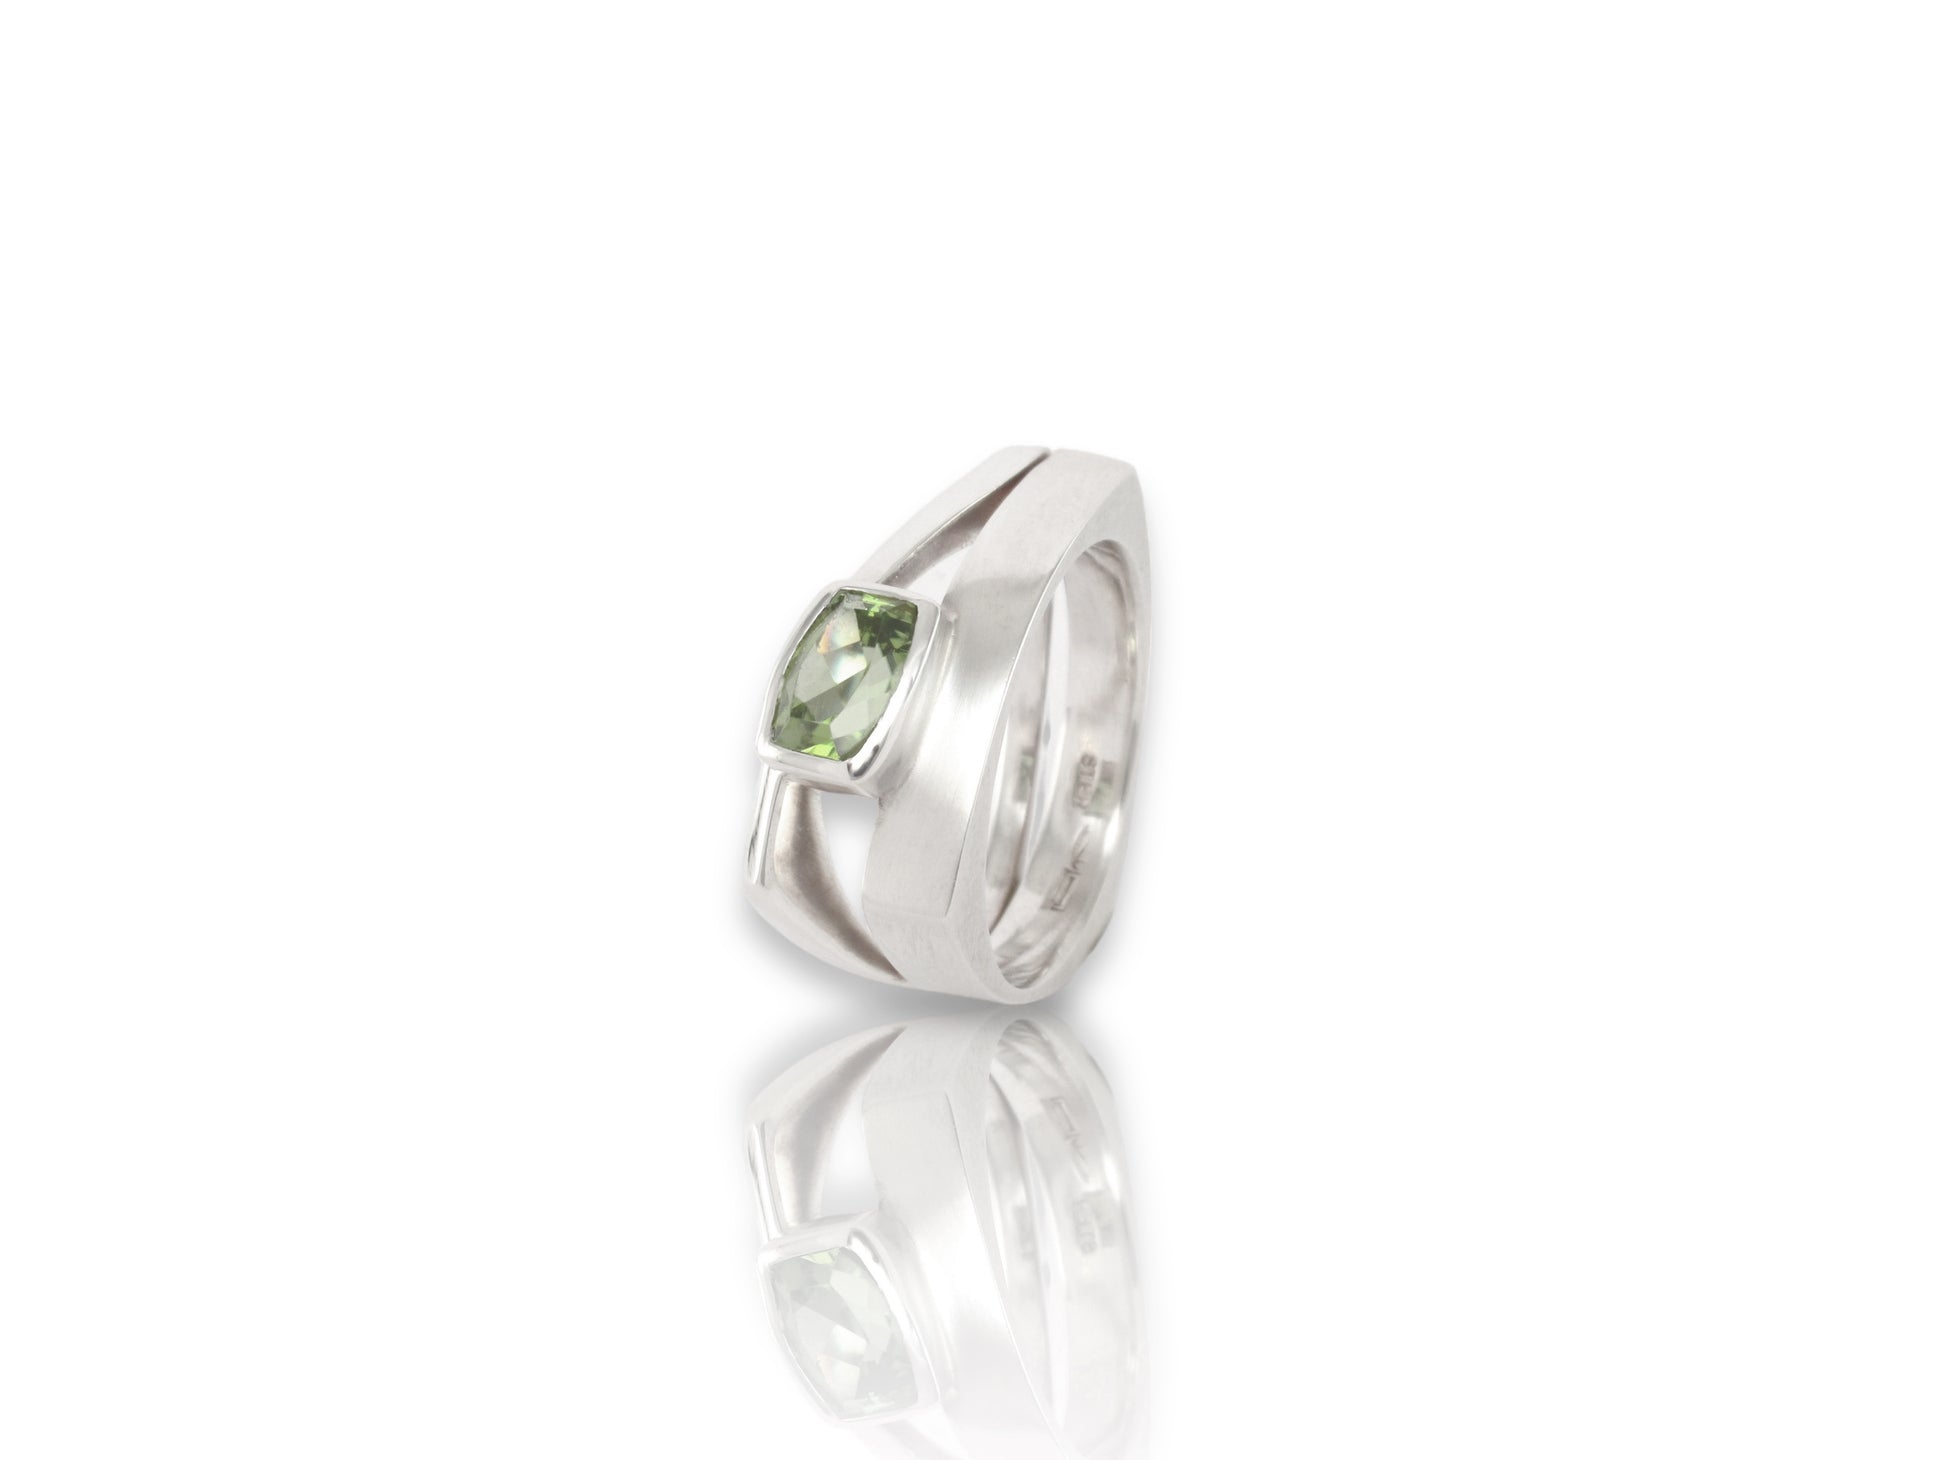 Sterling silver triangle ring, double band with flow and negative space for a bold light look and feel, with a bezel set rectangle facetted peridot, by ZEALmetal, Nicole Horlor, in Kingston, ON, Canada 